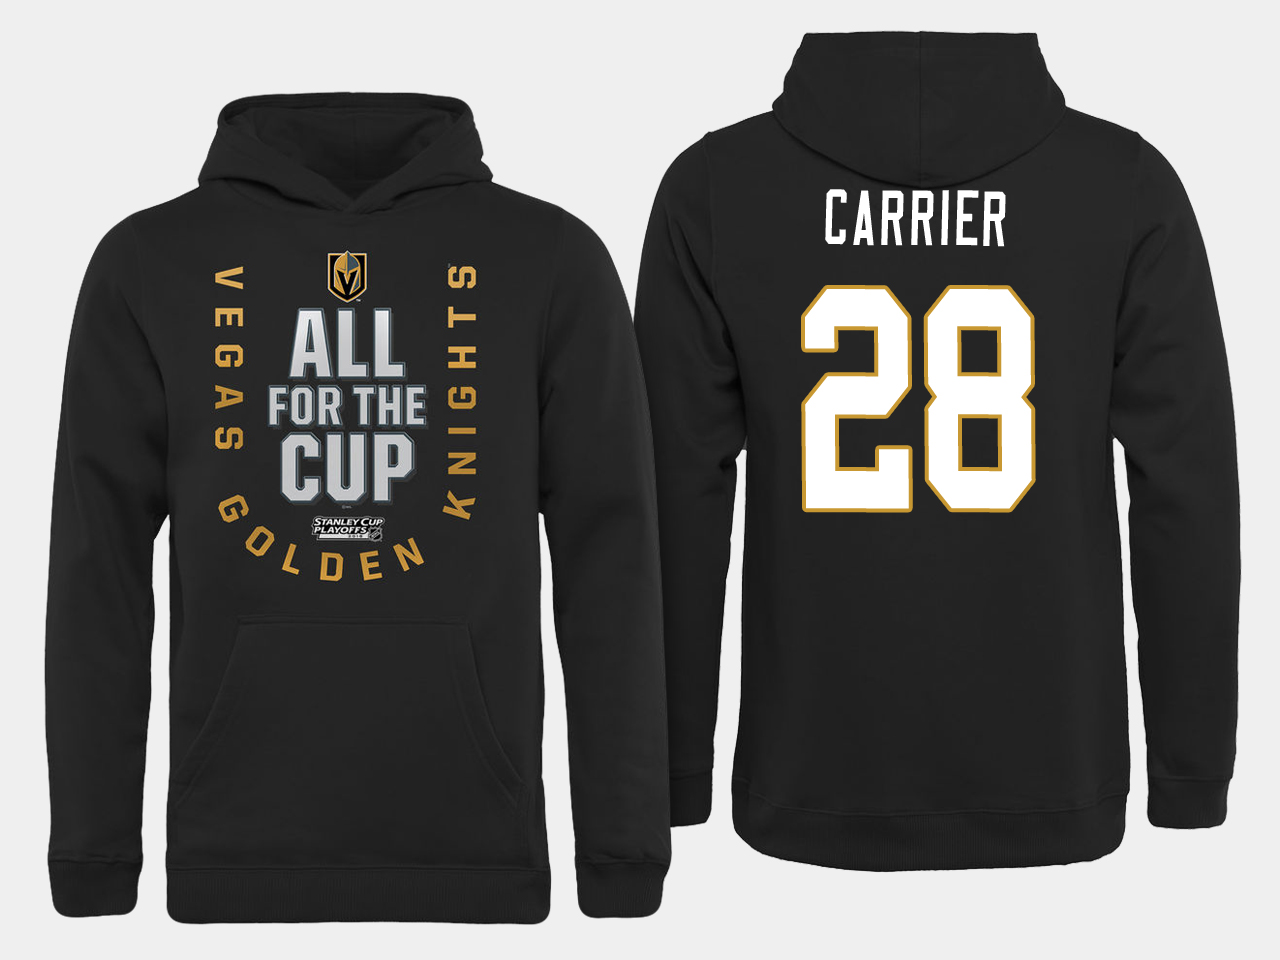 Men NHL Vegas Golden Knights #28 Carrier All for the Cup hoodie->more nhl jerseys->NHL Jersey